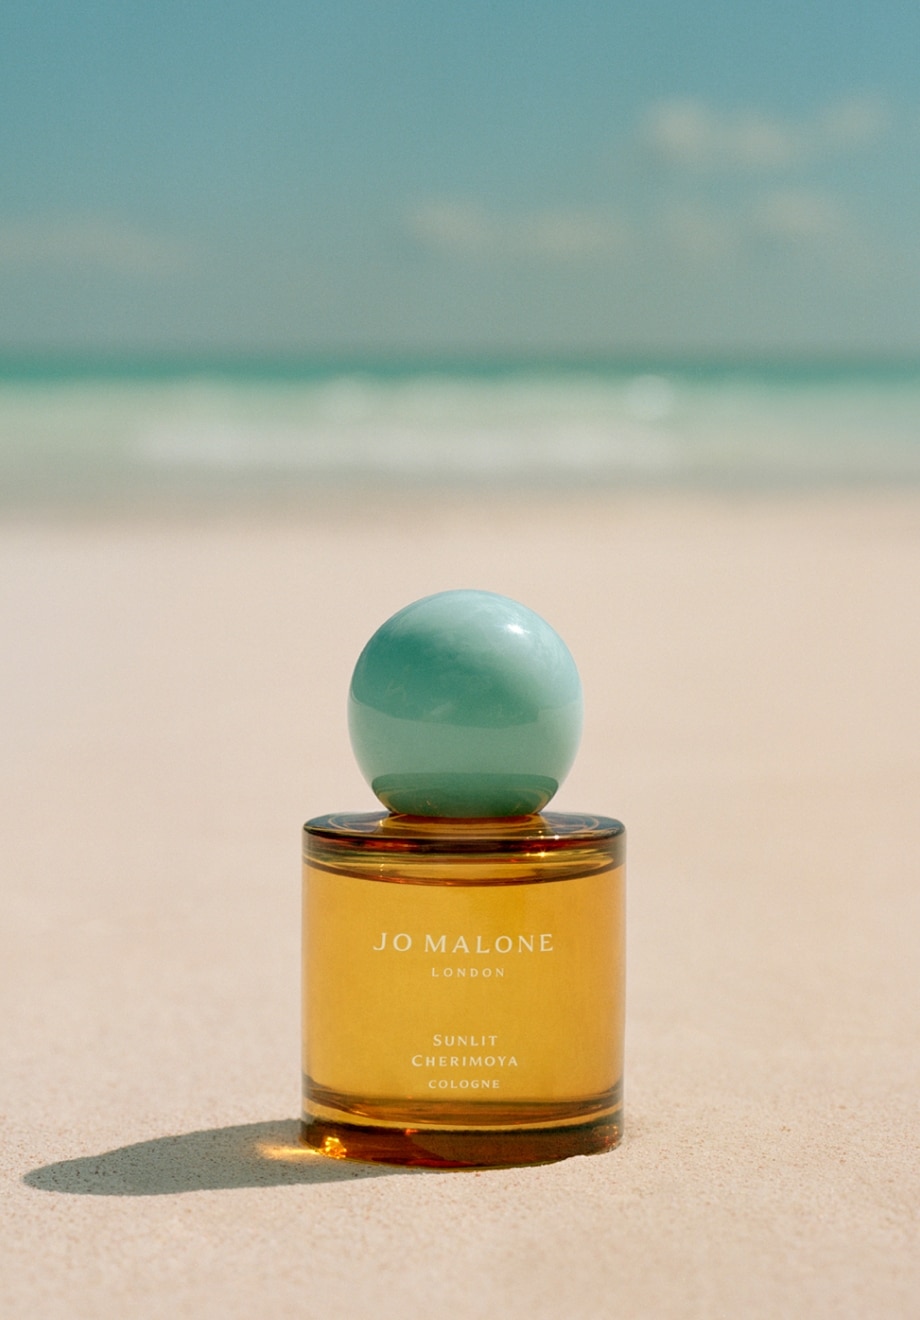 Jo Malone London Starlit Cherimoya cologne sat on a tropical beach. A clear yellow bottle with turquoise cap.